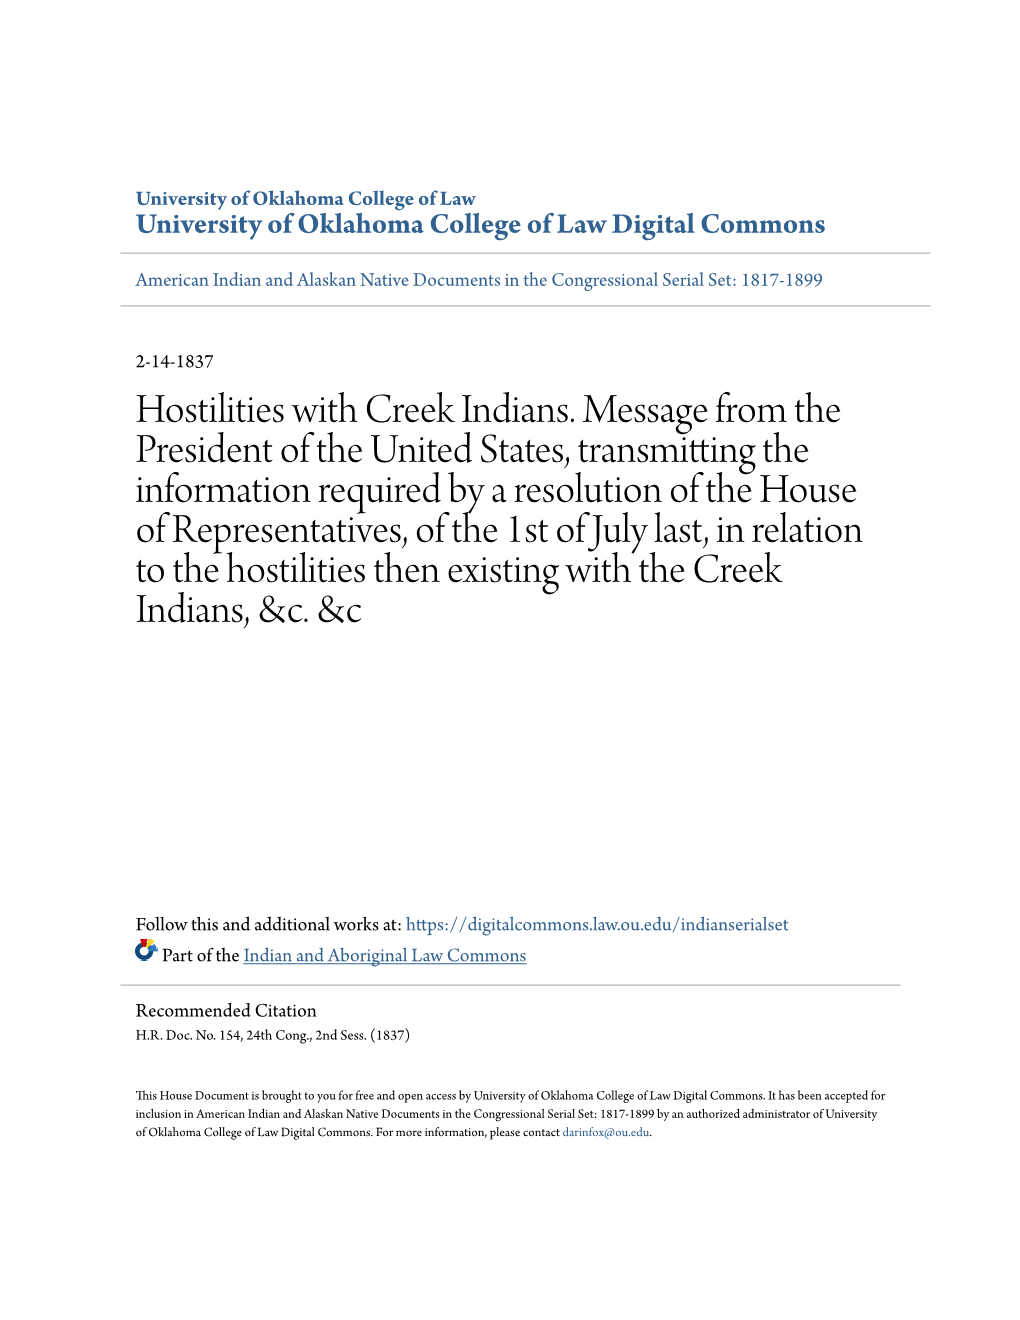 Hostilities with Creek Indians. Message from the President of The